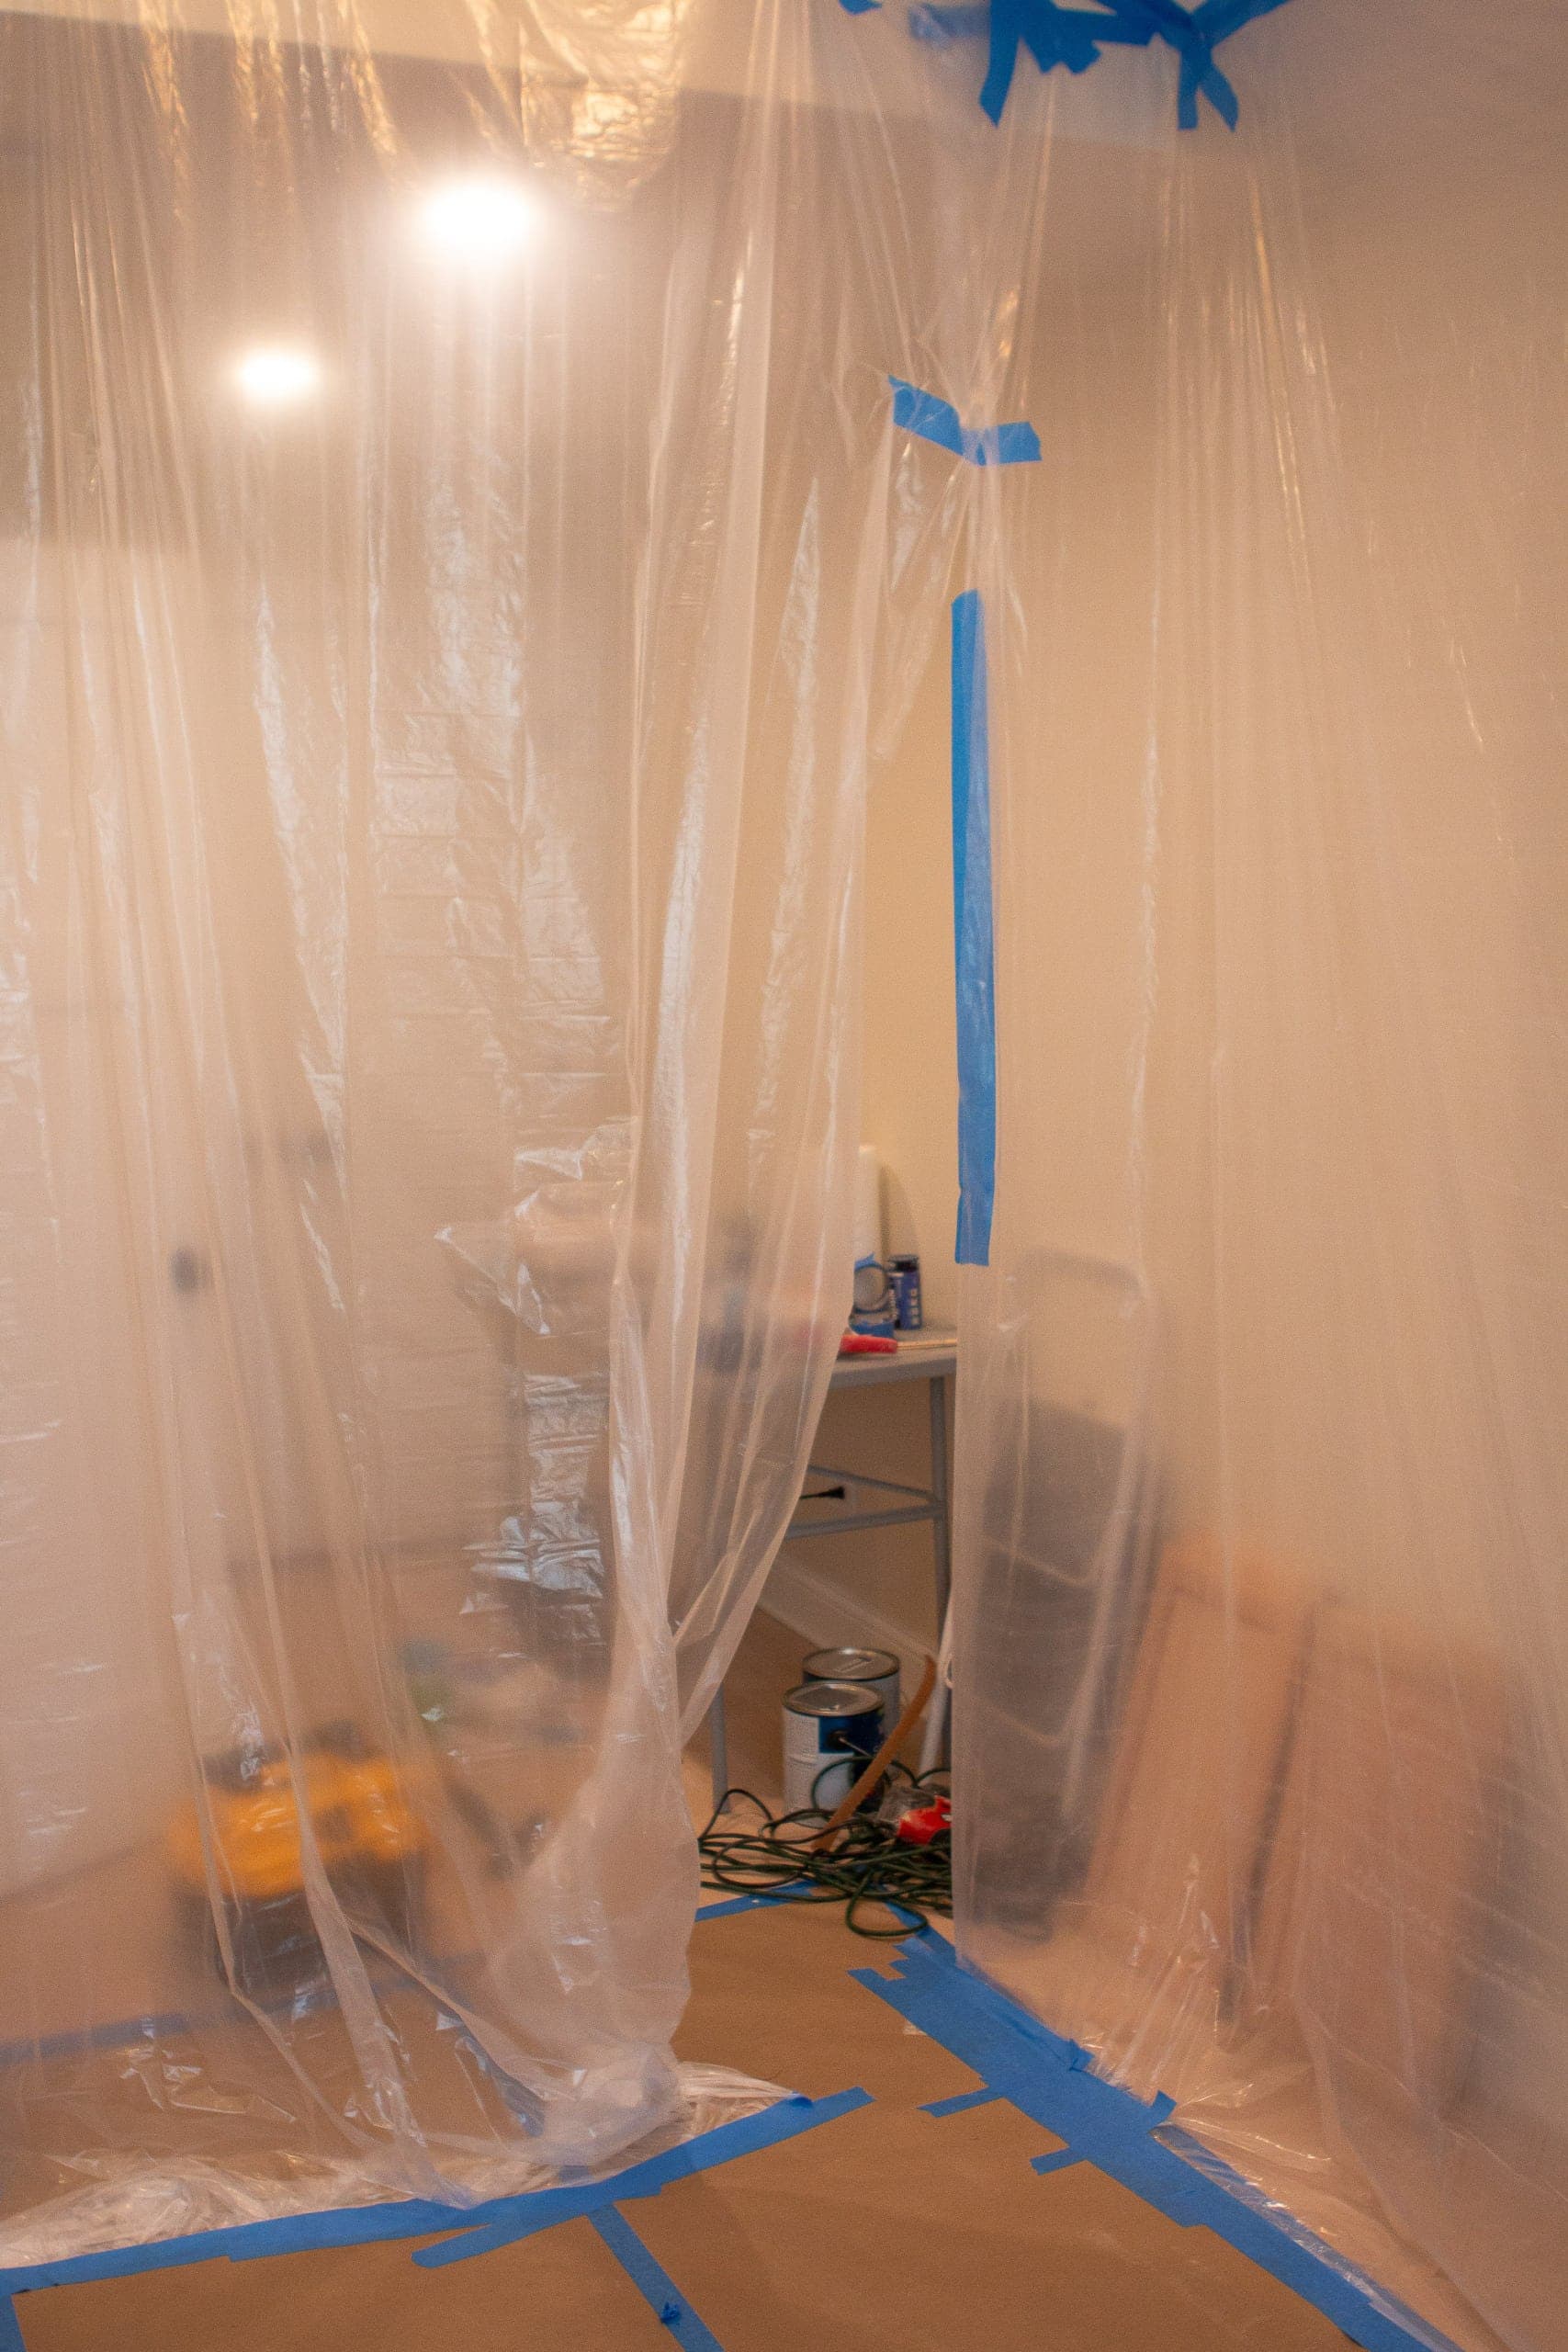 Prepping a room for paint sprayer